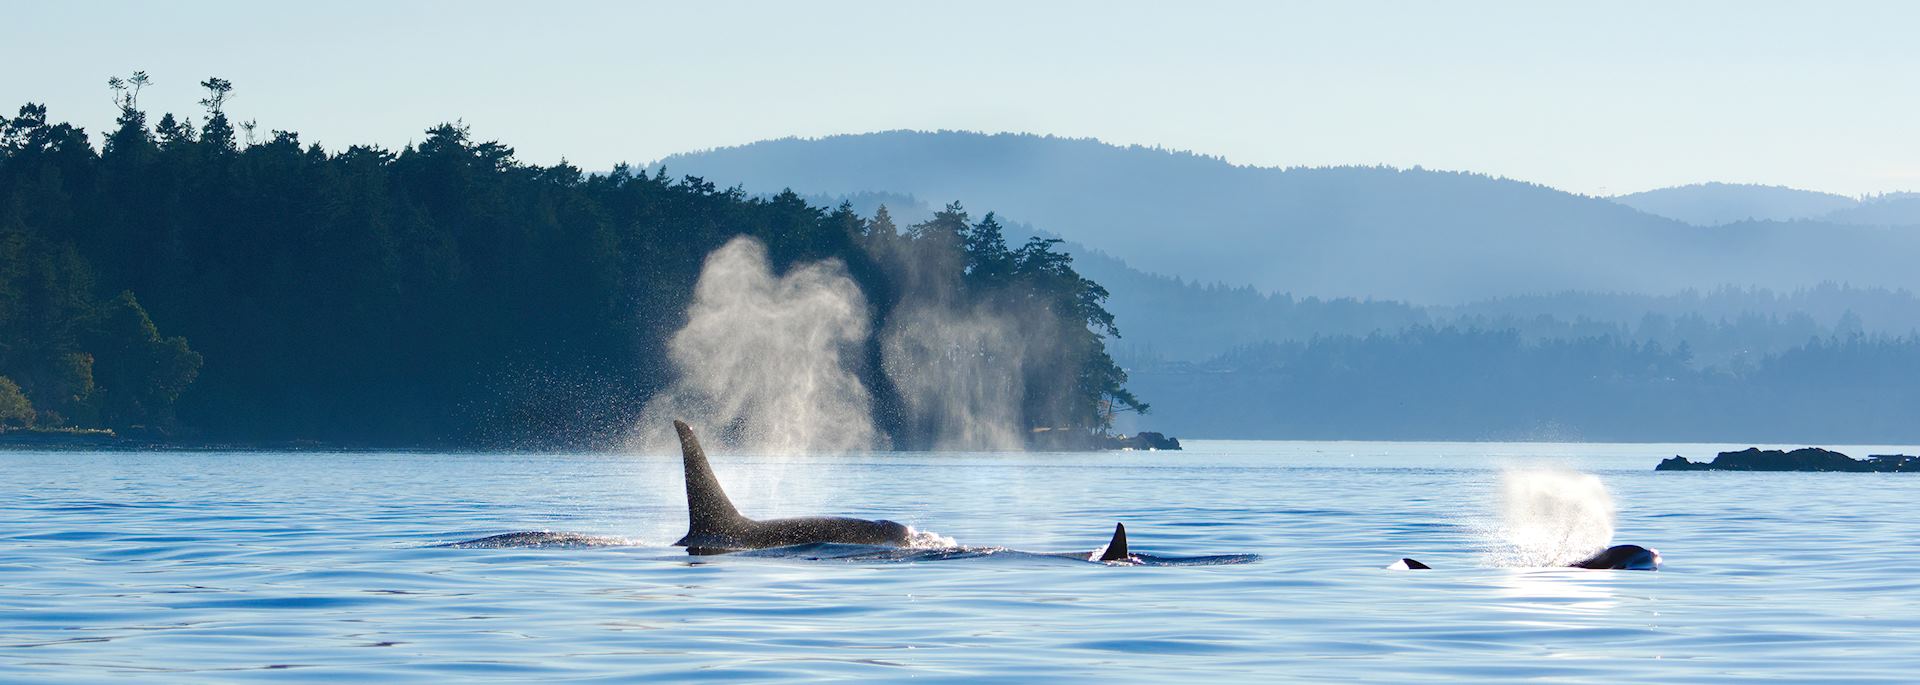 Orca off Vancouver Island